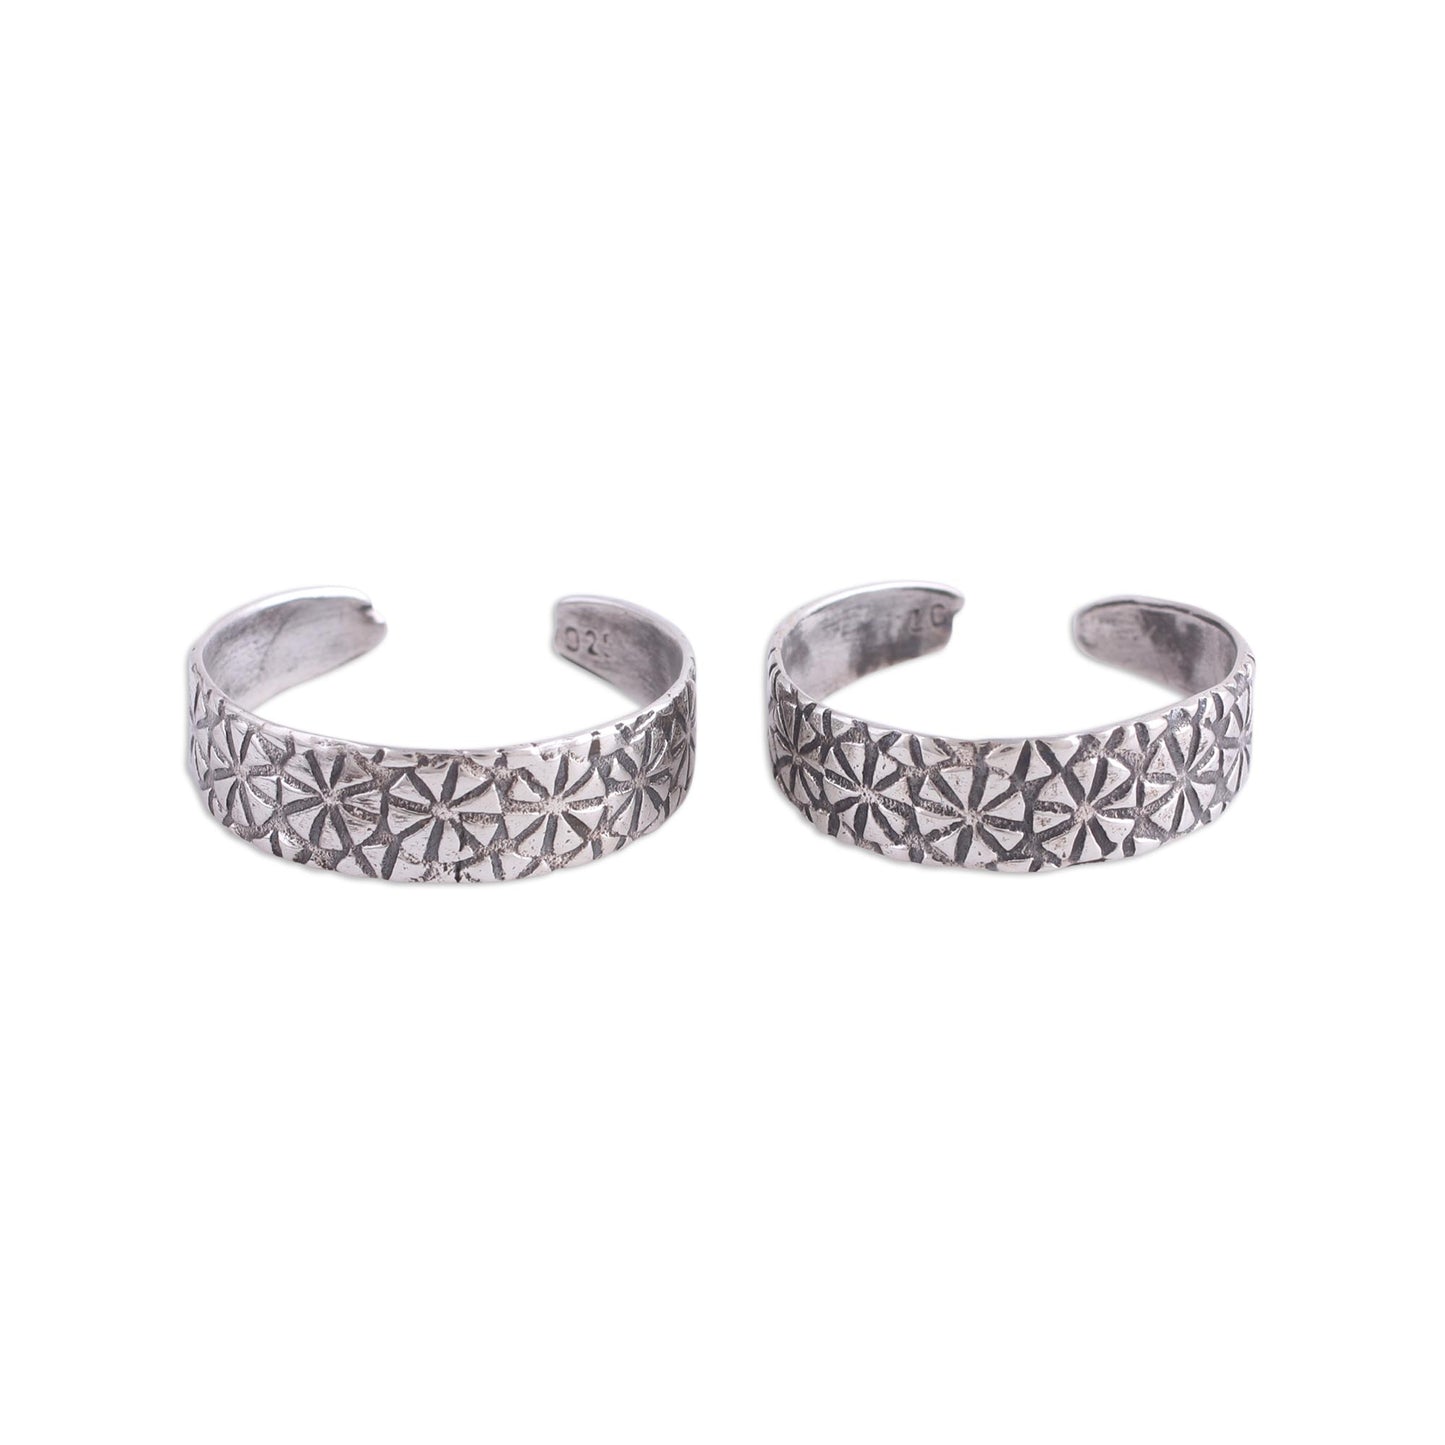 Floral Saga Pair of Floral Sterling Silver Toe Rings from India